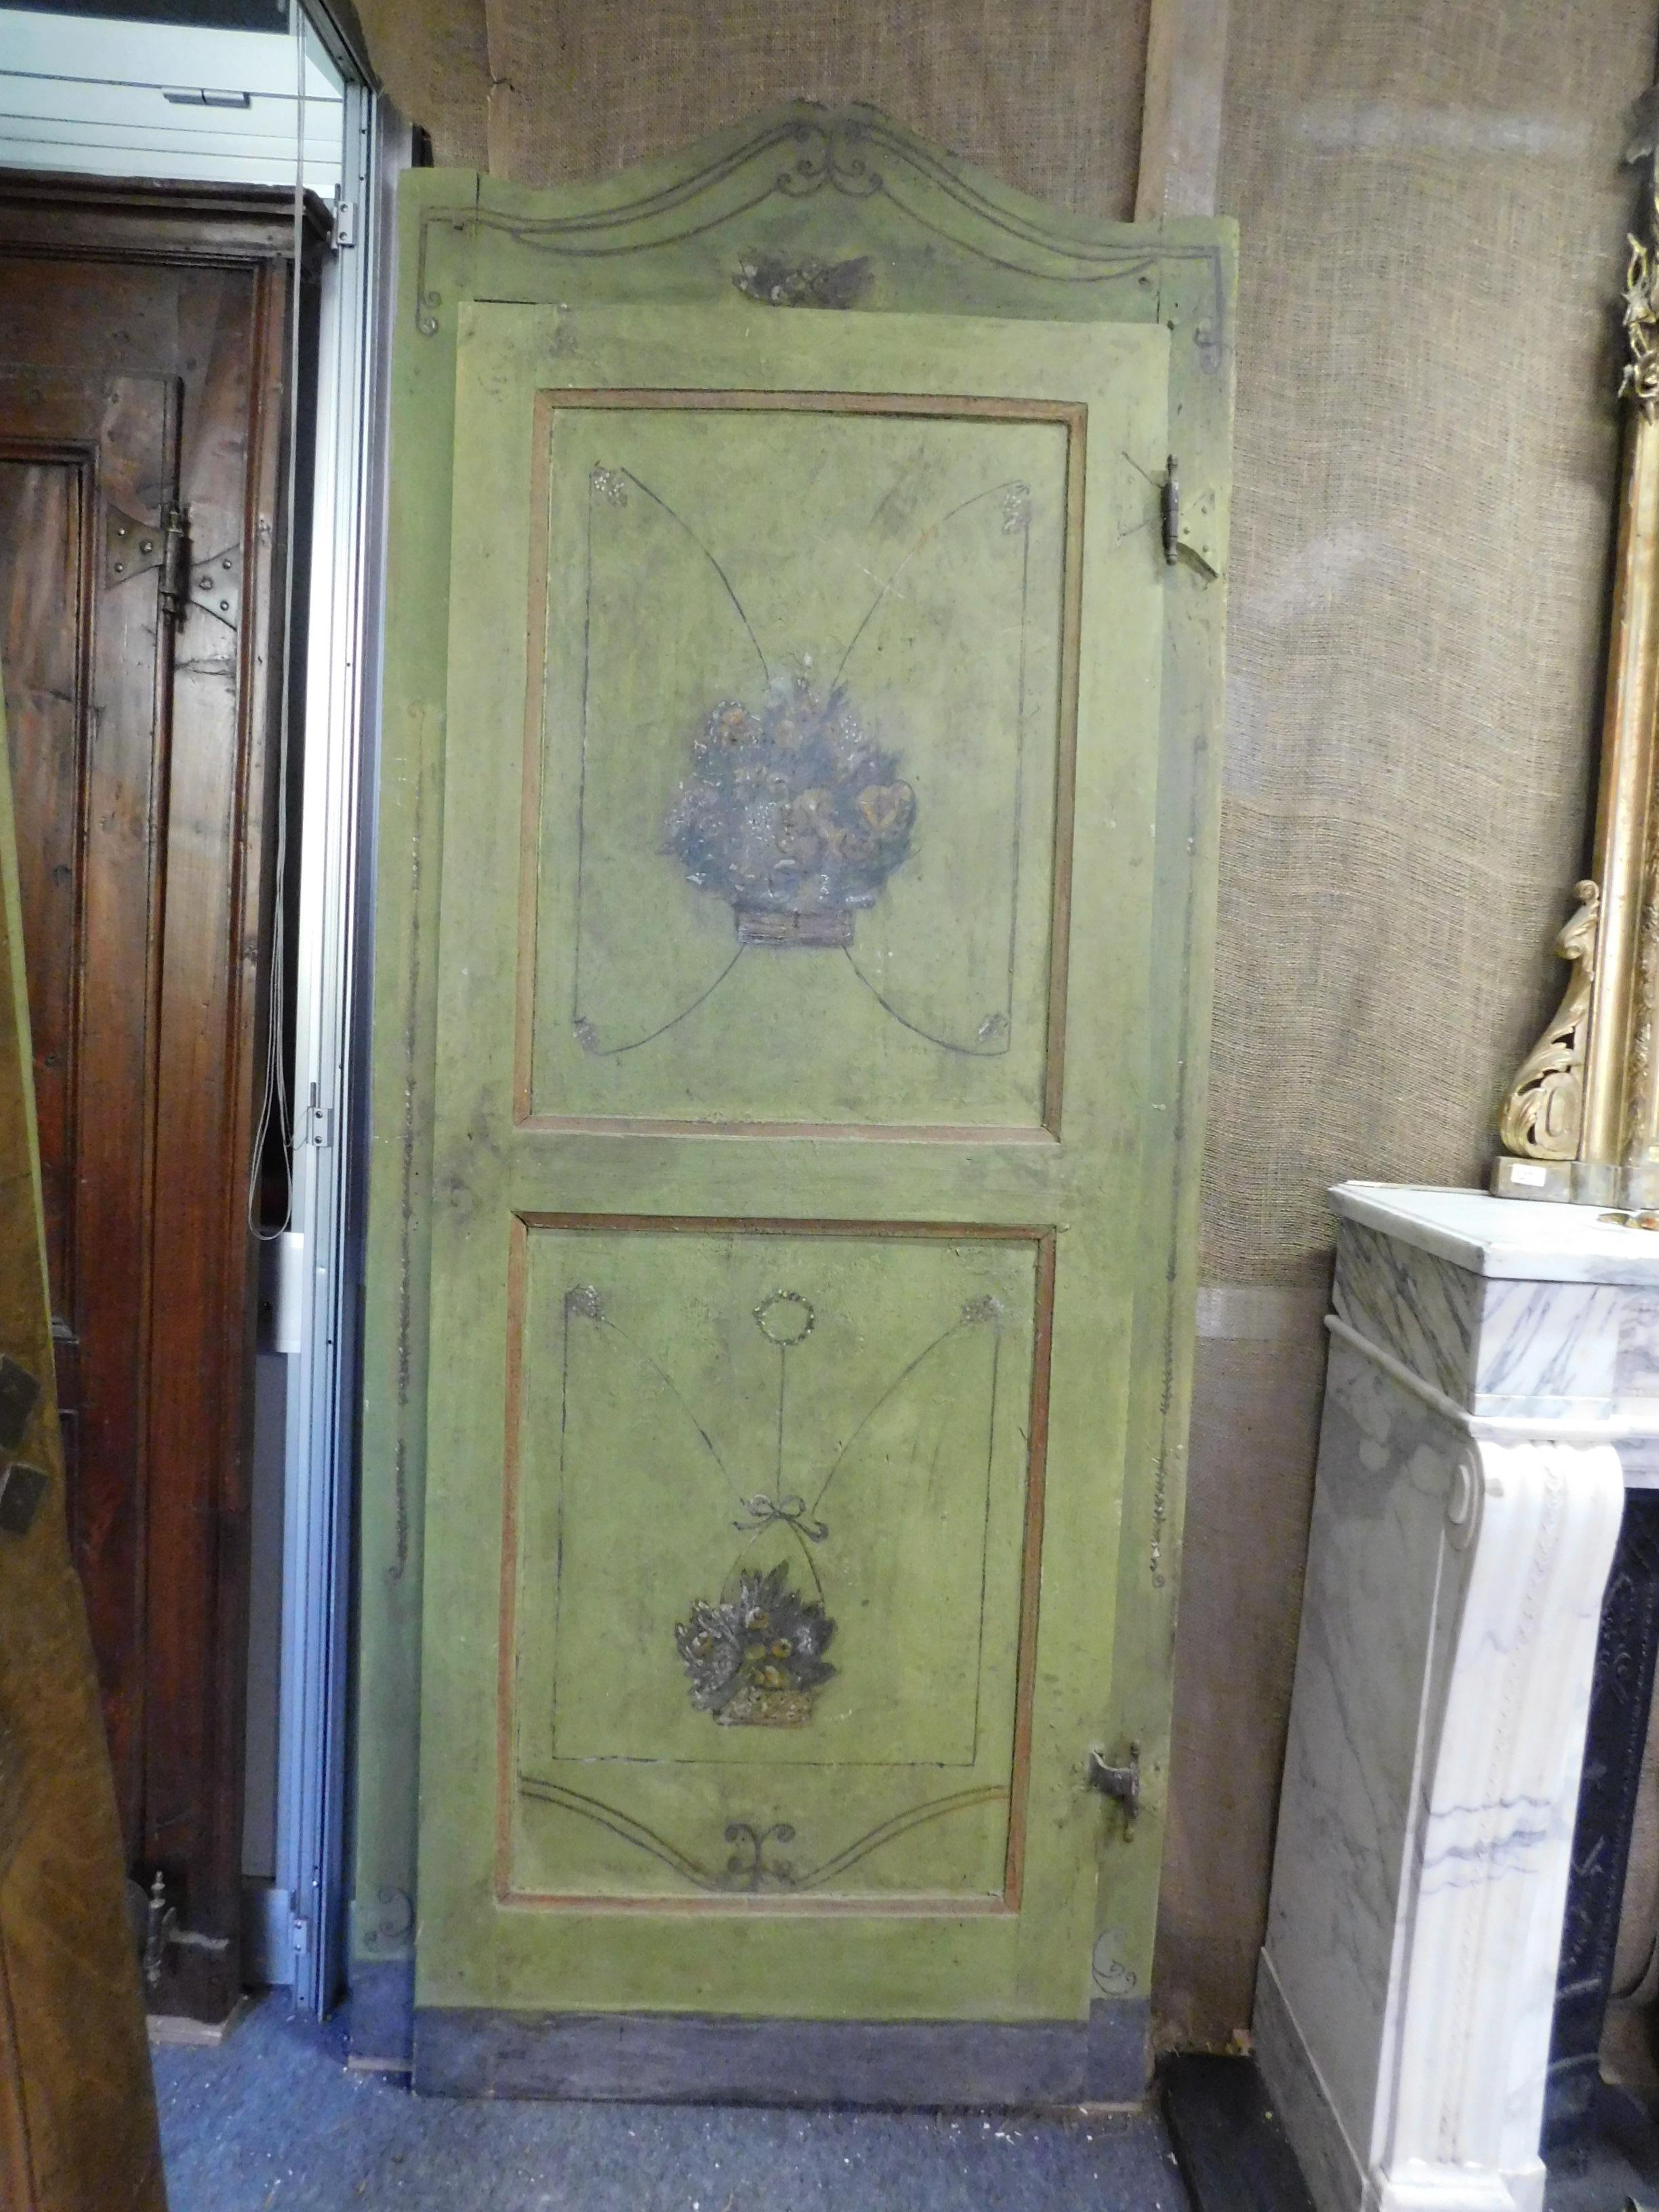 Set of 2 antique green doors, lacquered and hand painted, with floral designs and complete with wavy frame, beautiful original irons and patina of the time, built completely by hand in the 18th century for home in Italy (Piedmont). We can sell